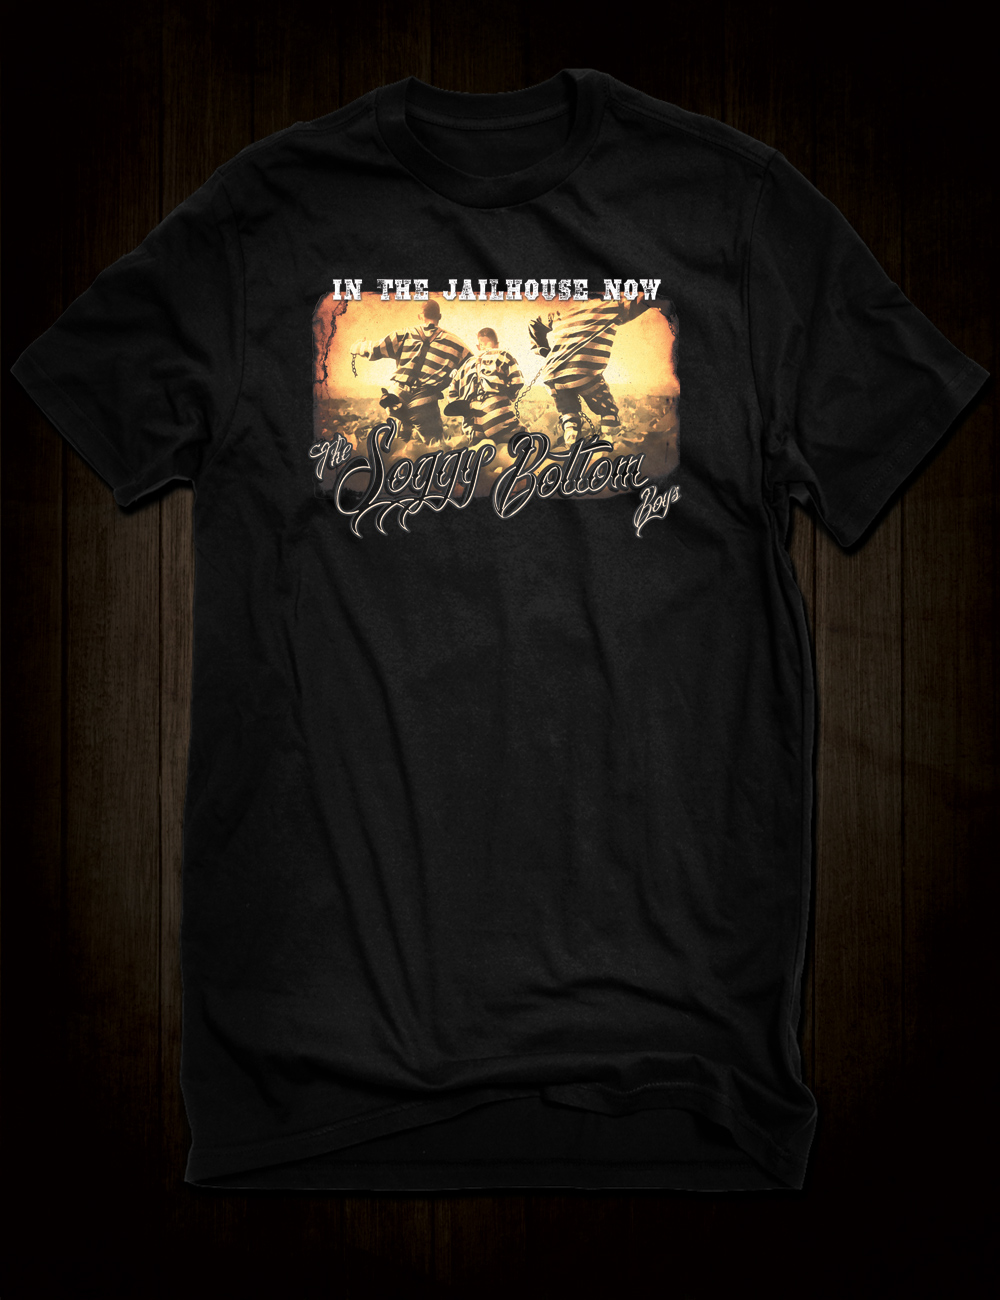 The Soggy Bottom Boys T Shirt From Hellwood Outfitters